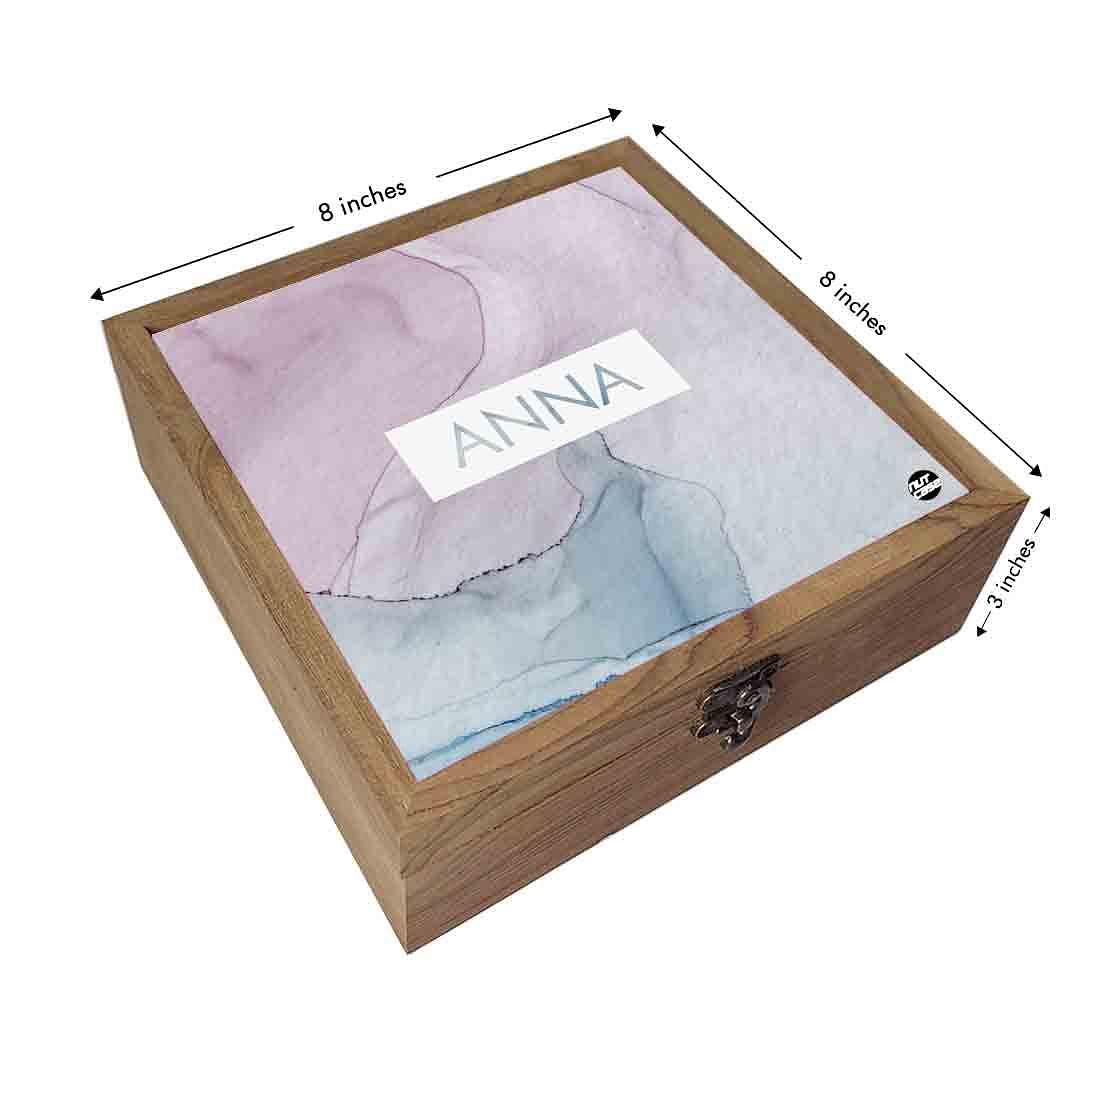 Boxes for Jewelry Storage Box Organizer - Blue Gray Ink Watercolor Nutcase